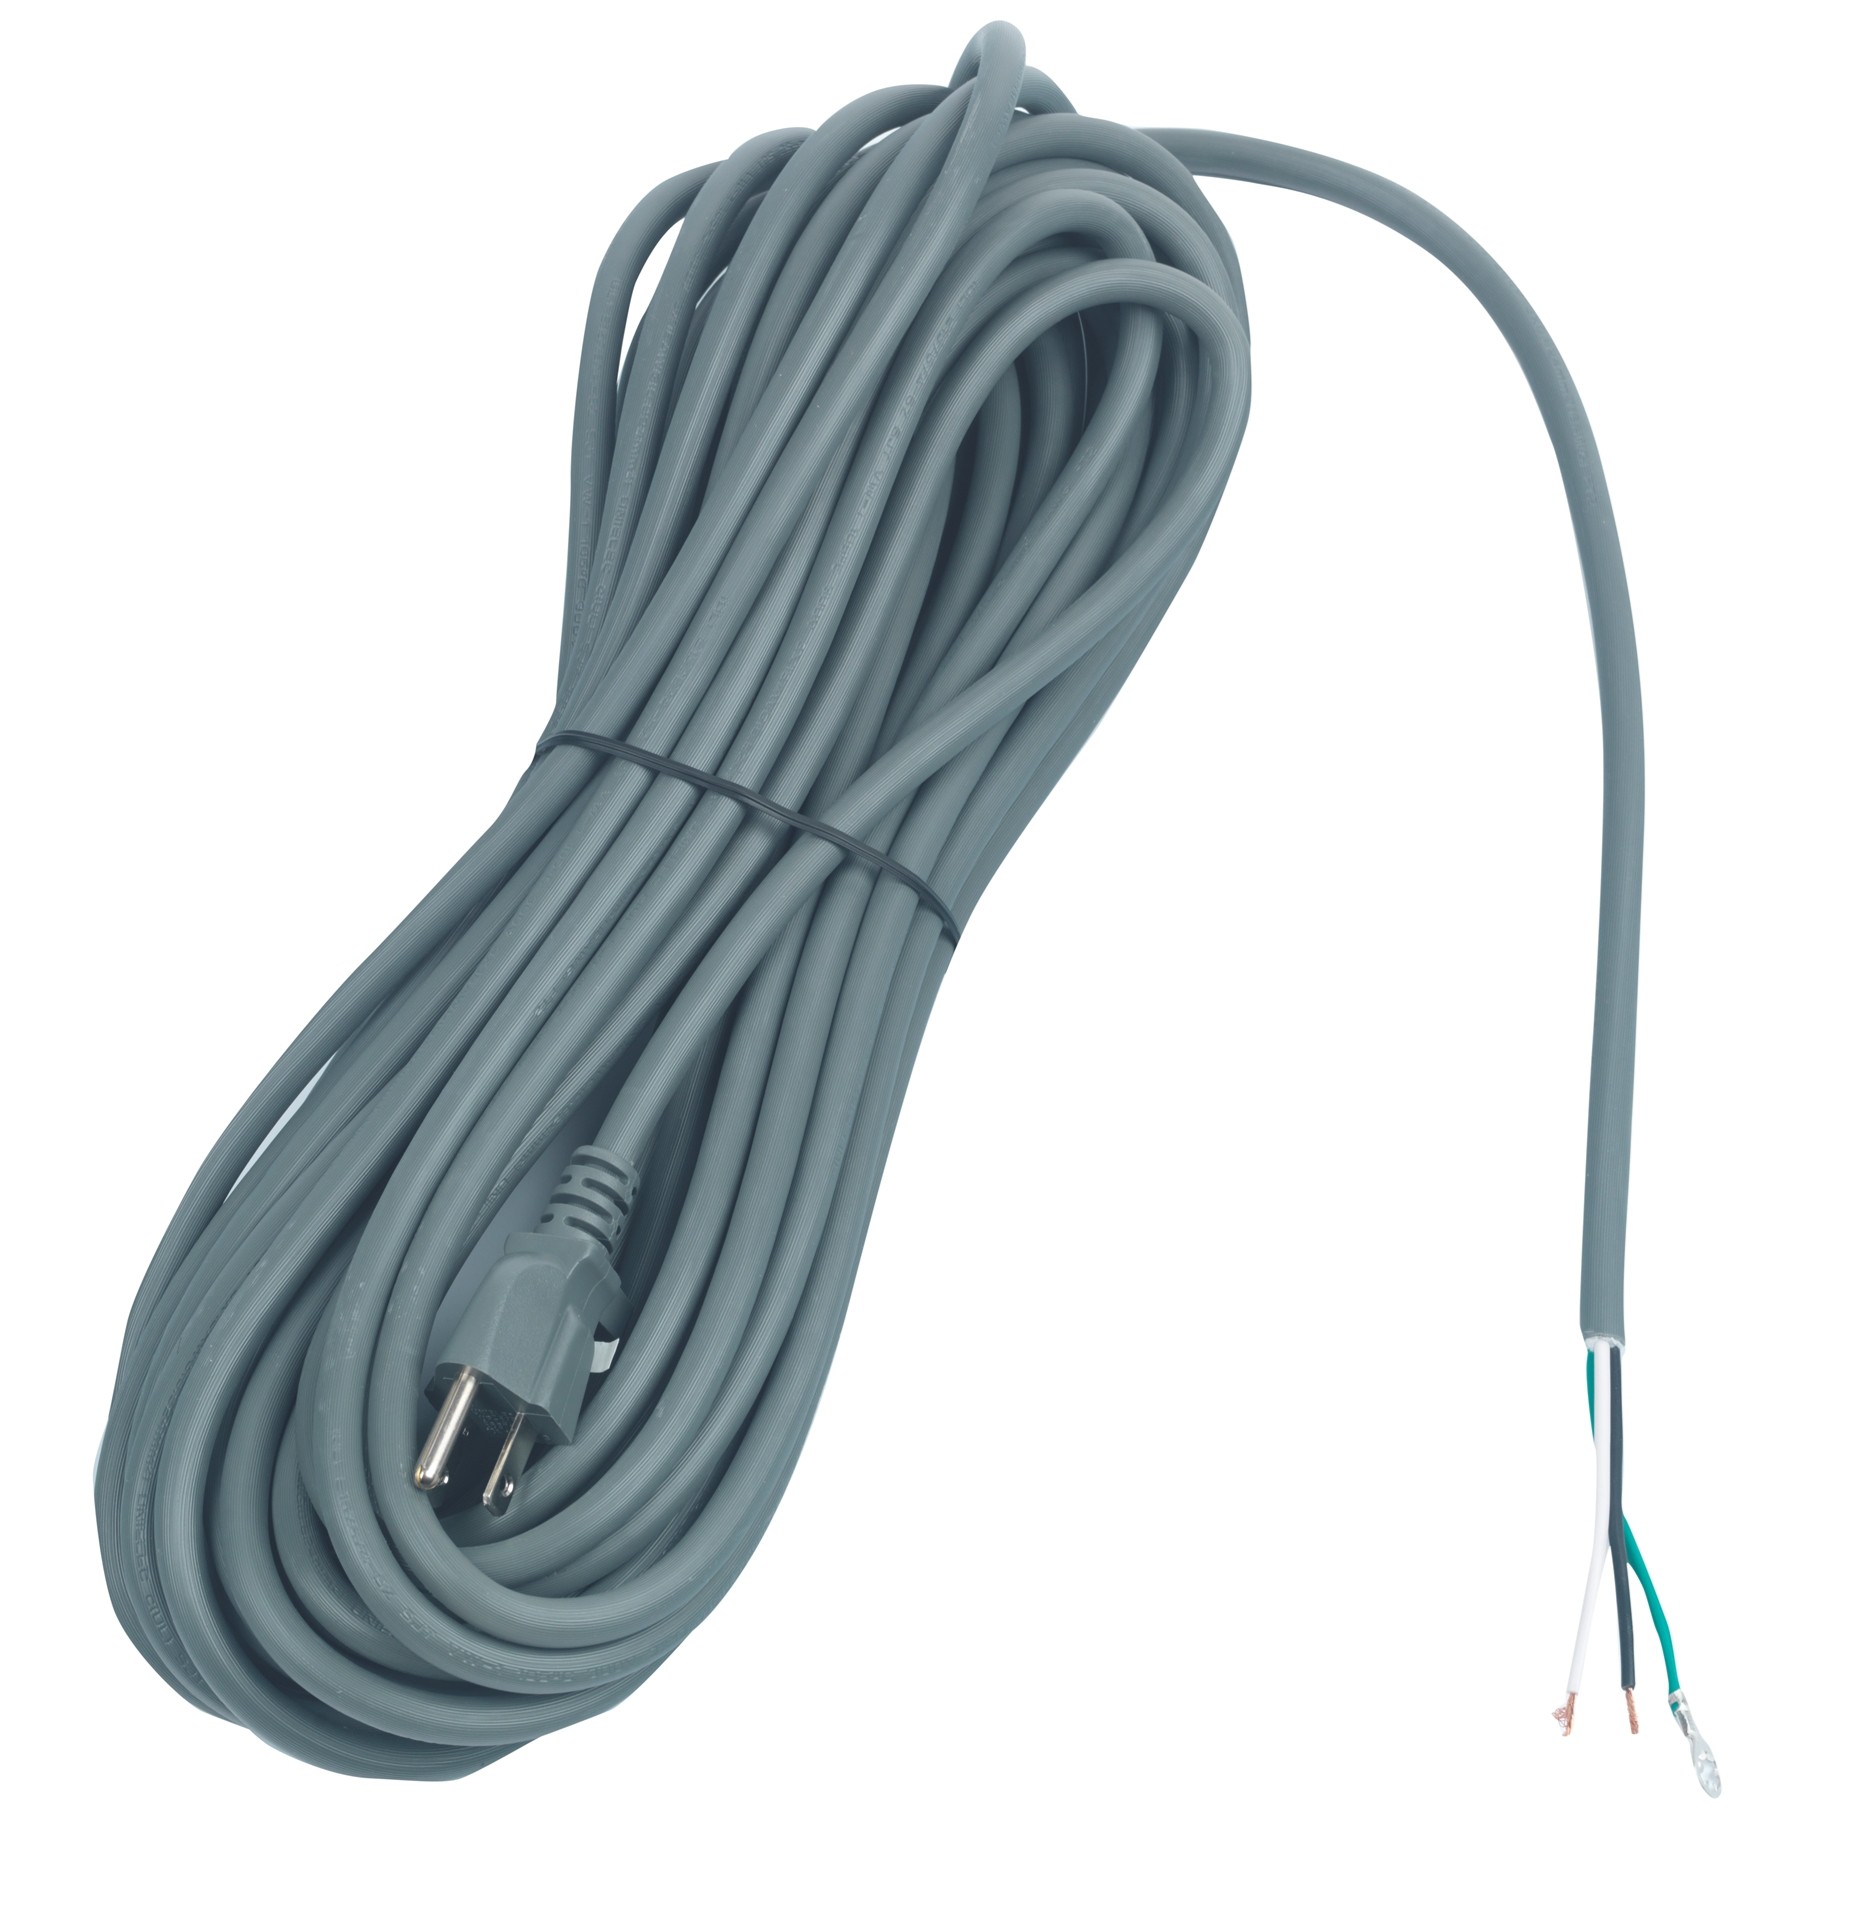 Sanitaire+Cord+%26+Terminal+Assembly+%2850+ft%2C+18%2F3%2C+grey%29+-+5237018+%28Replaces+E-5237012%29